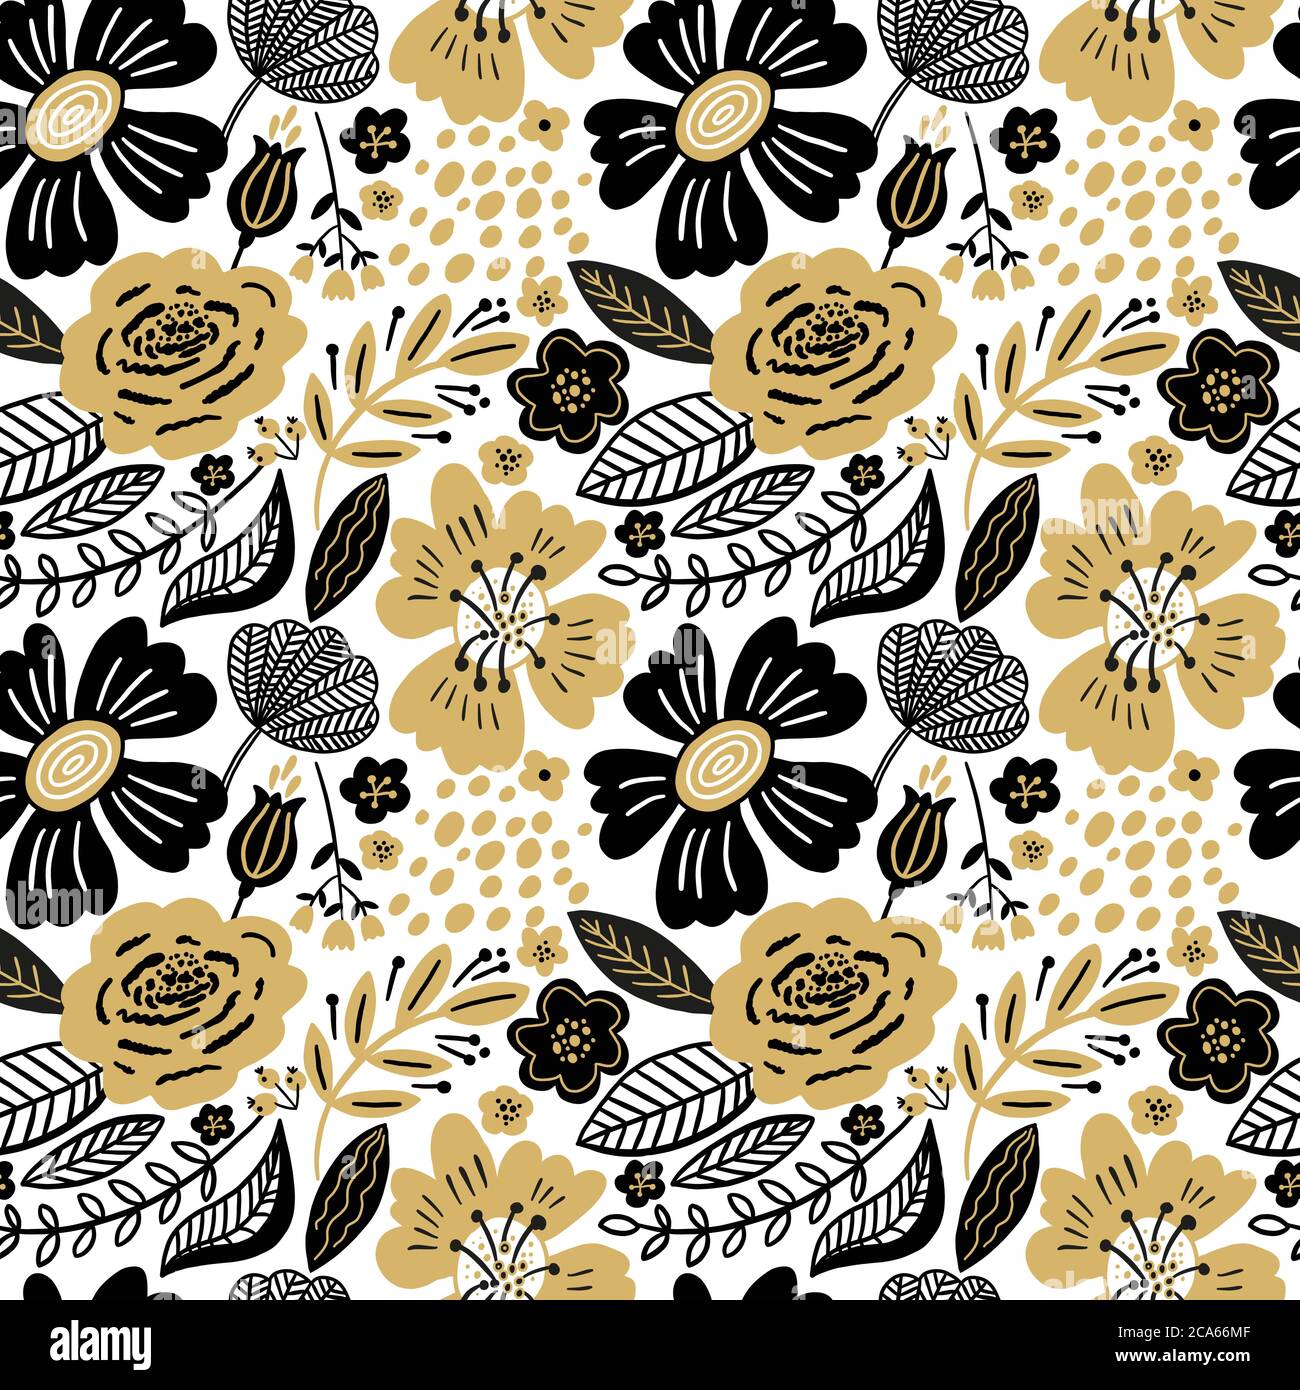 Vector floral seamless pattern gold and black colors. Flat flowers, petals, leaves with and doodle elements. Collage style botanical background for Stock Vector